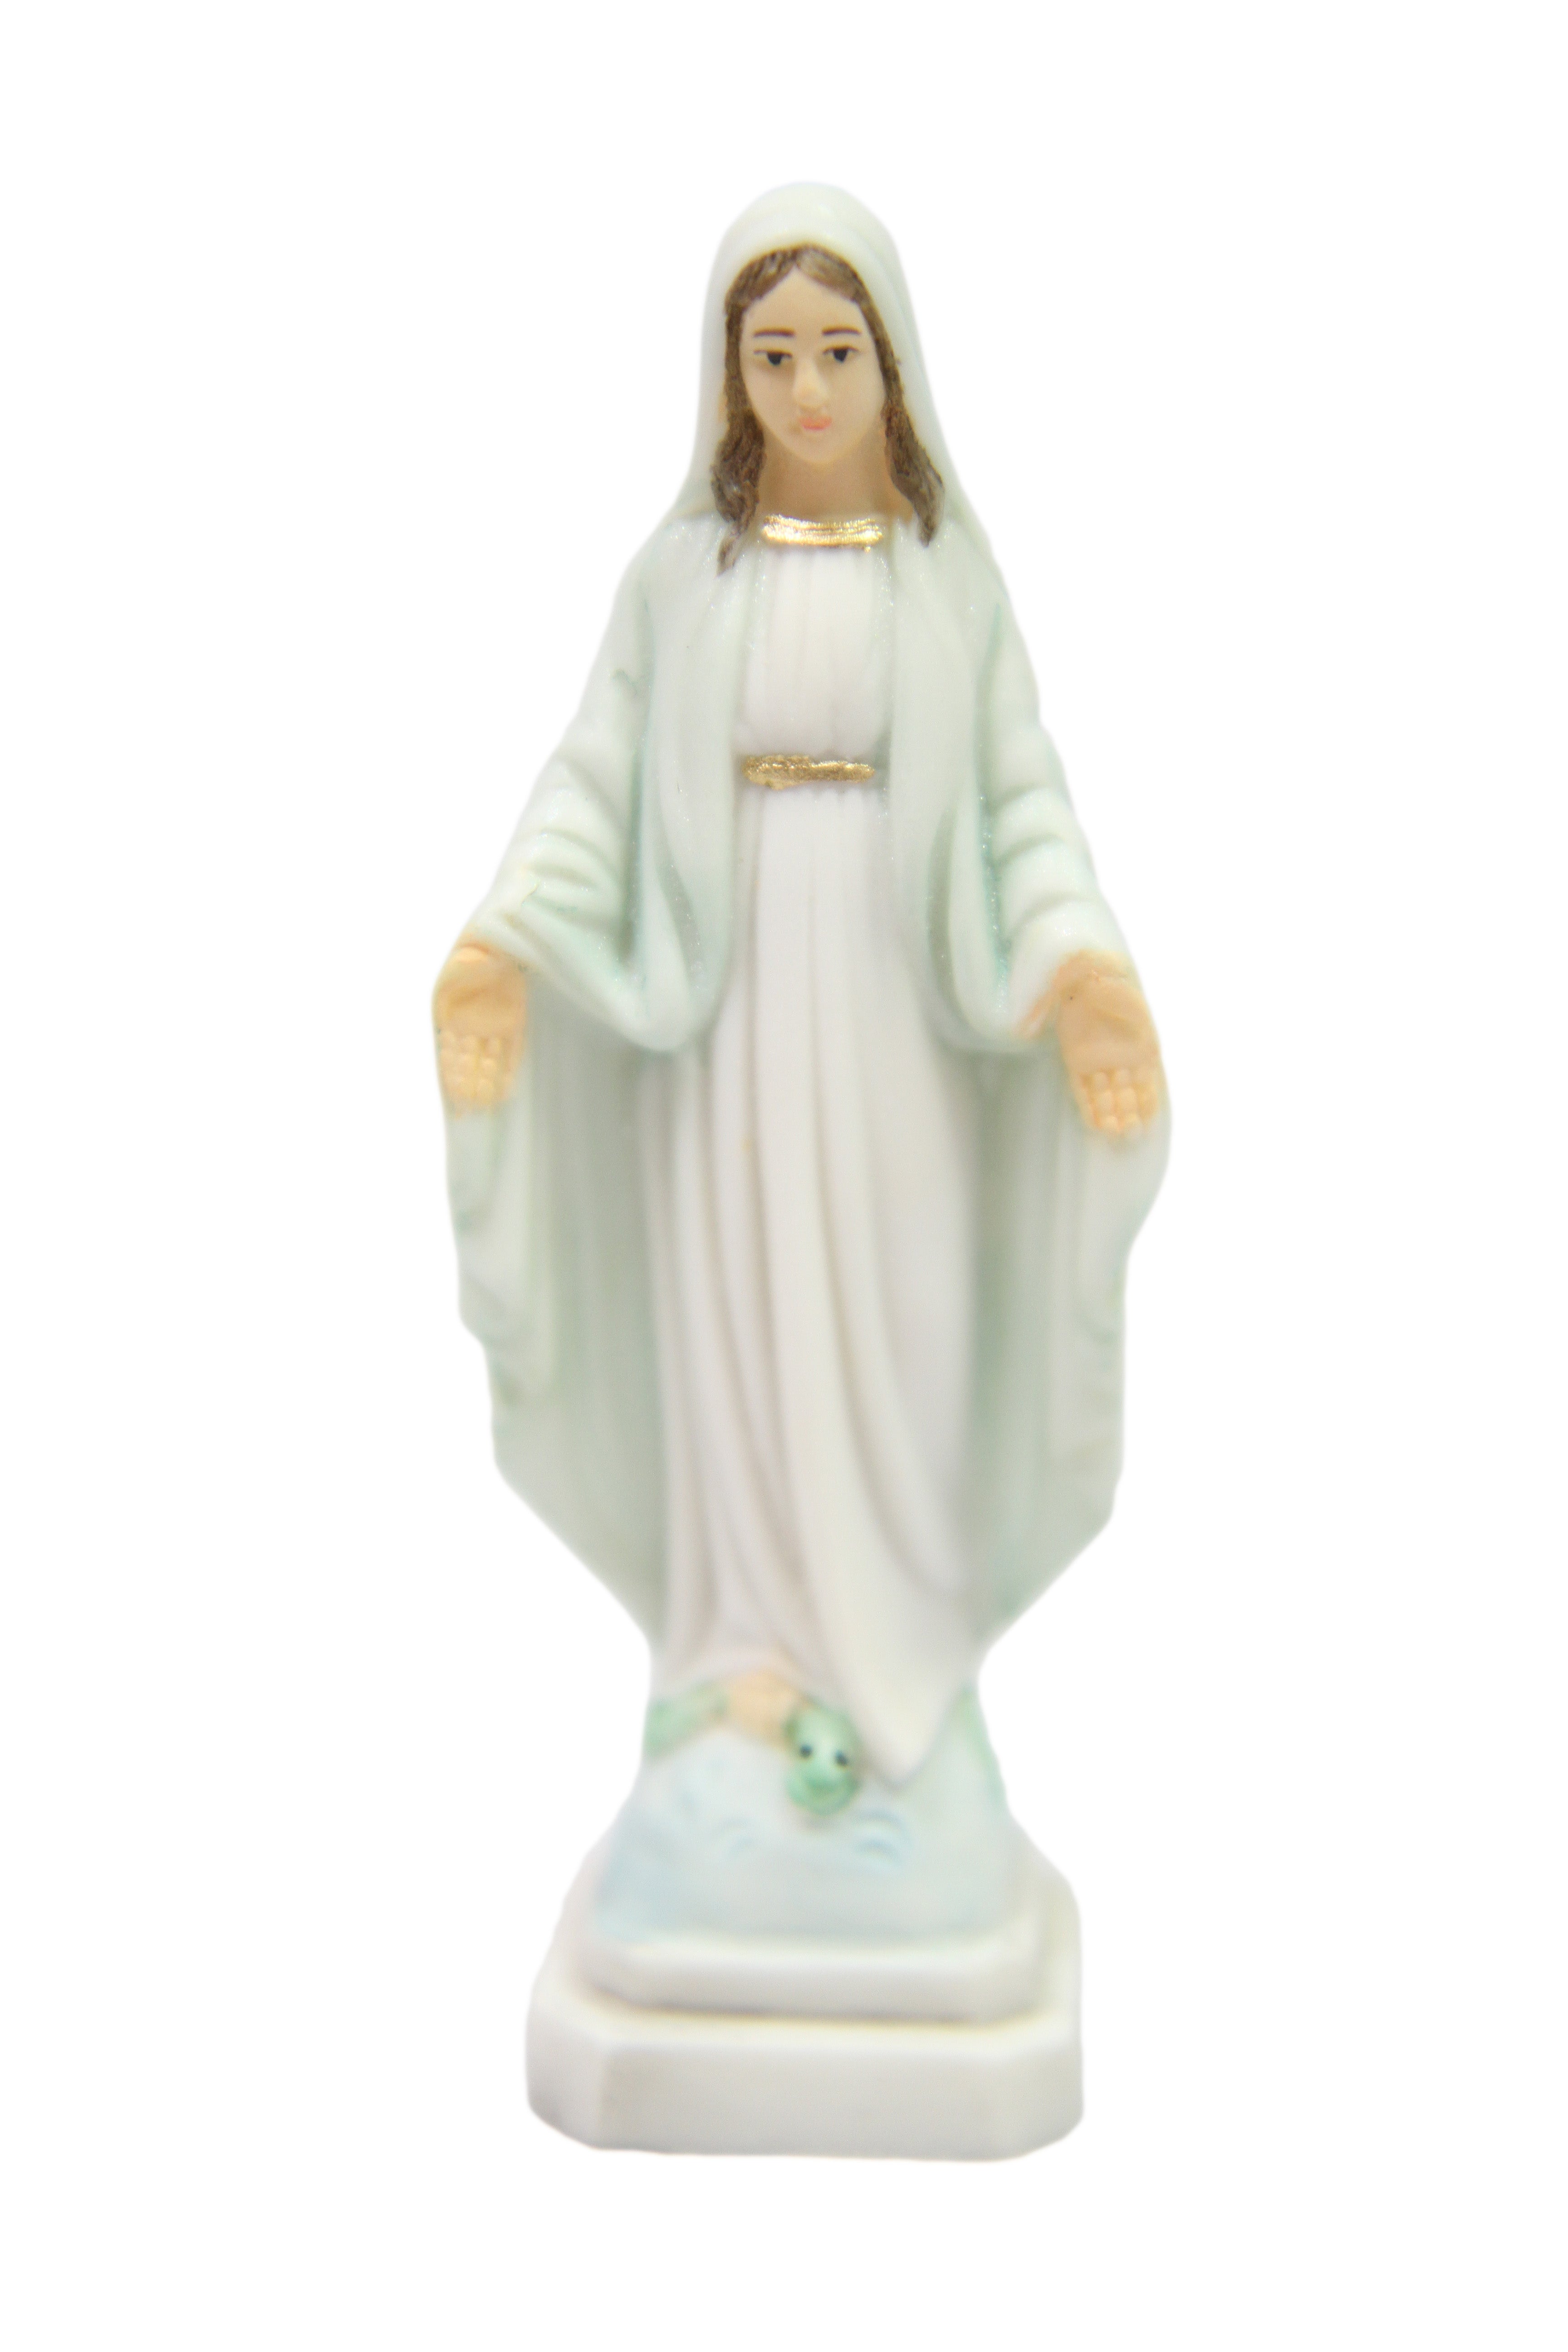 4.25 Inch Our Lady of Grace Virgin Mary Catholic Statue Figurine Vittoria Made in Italy